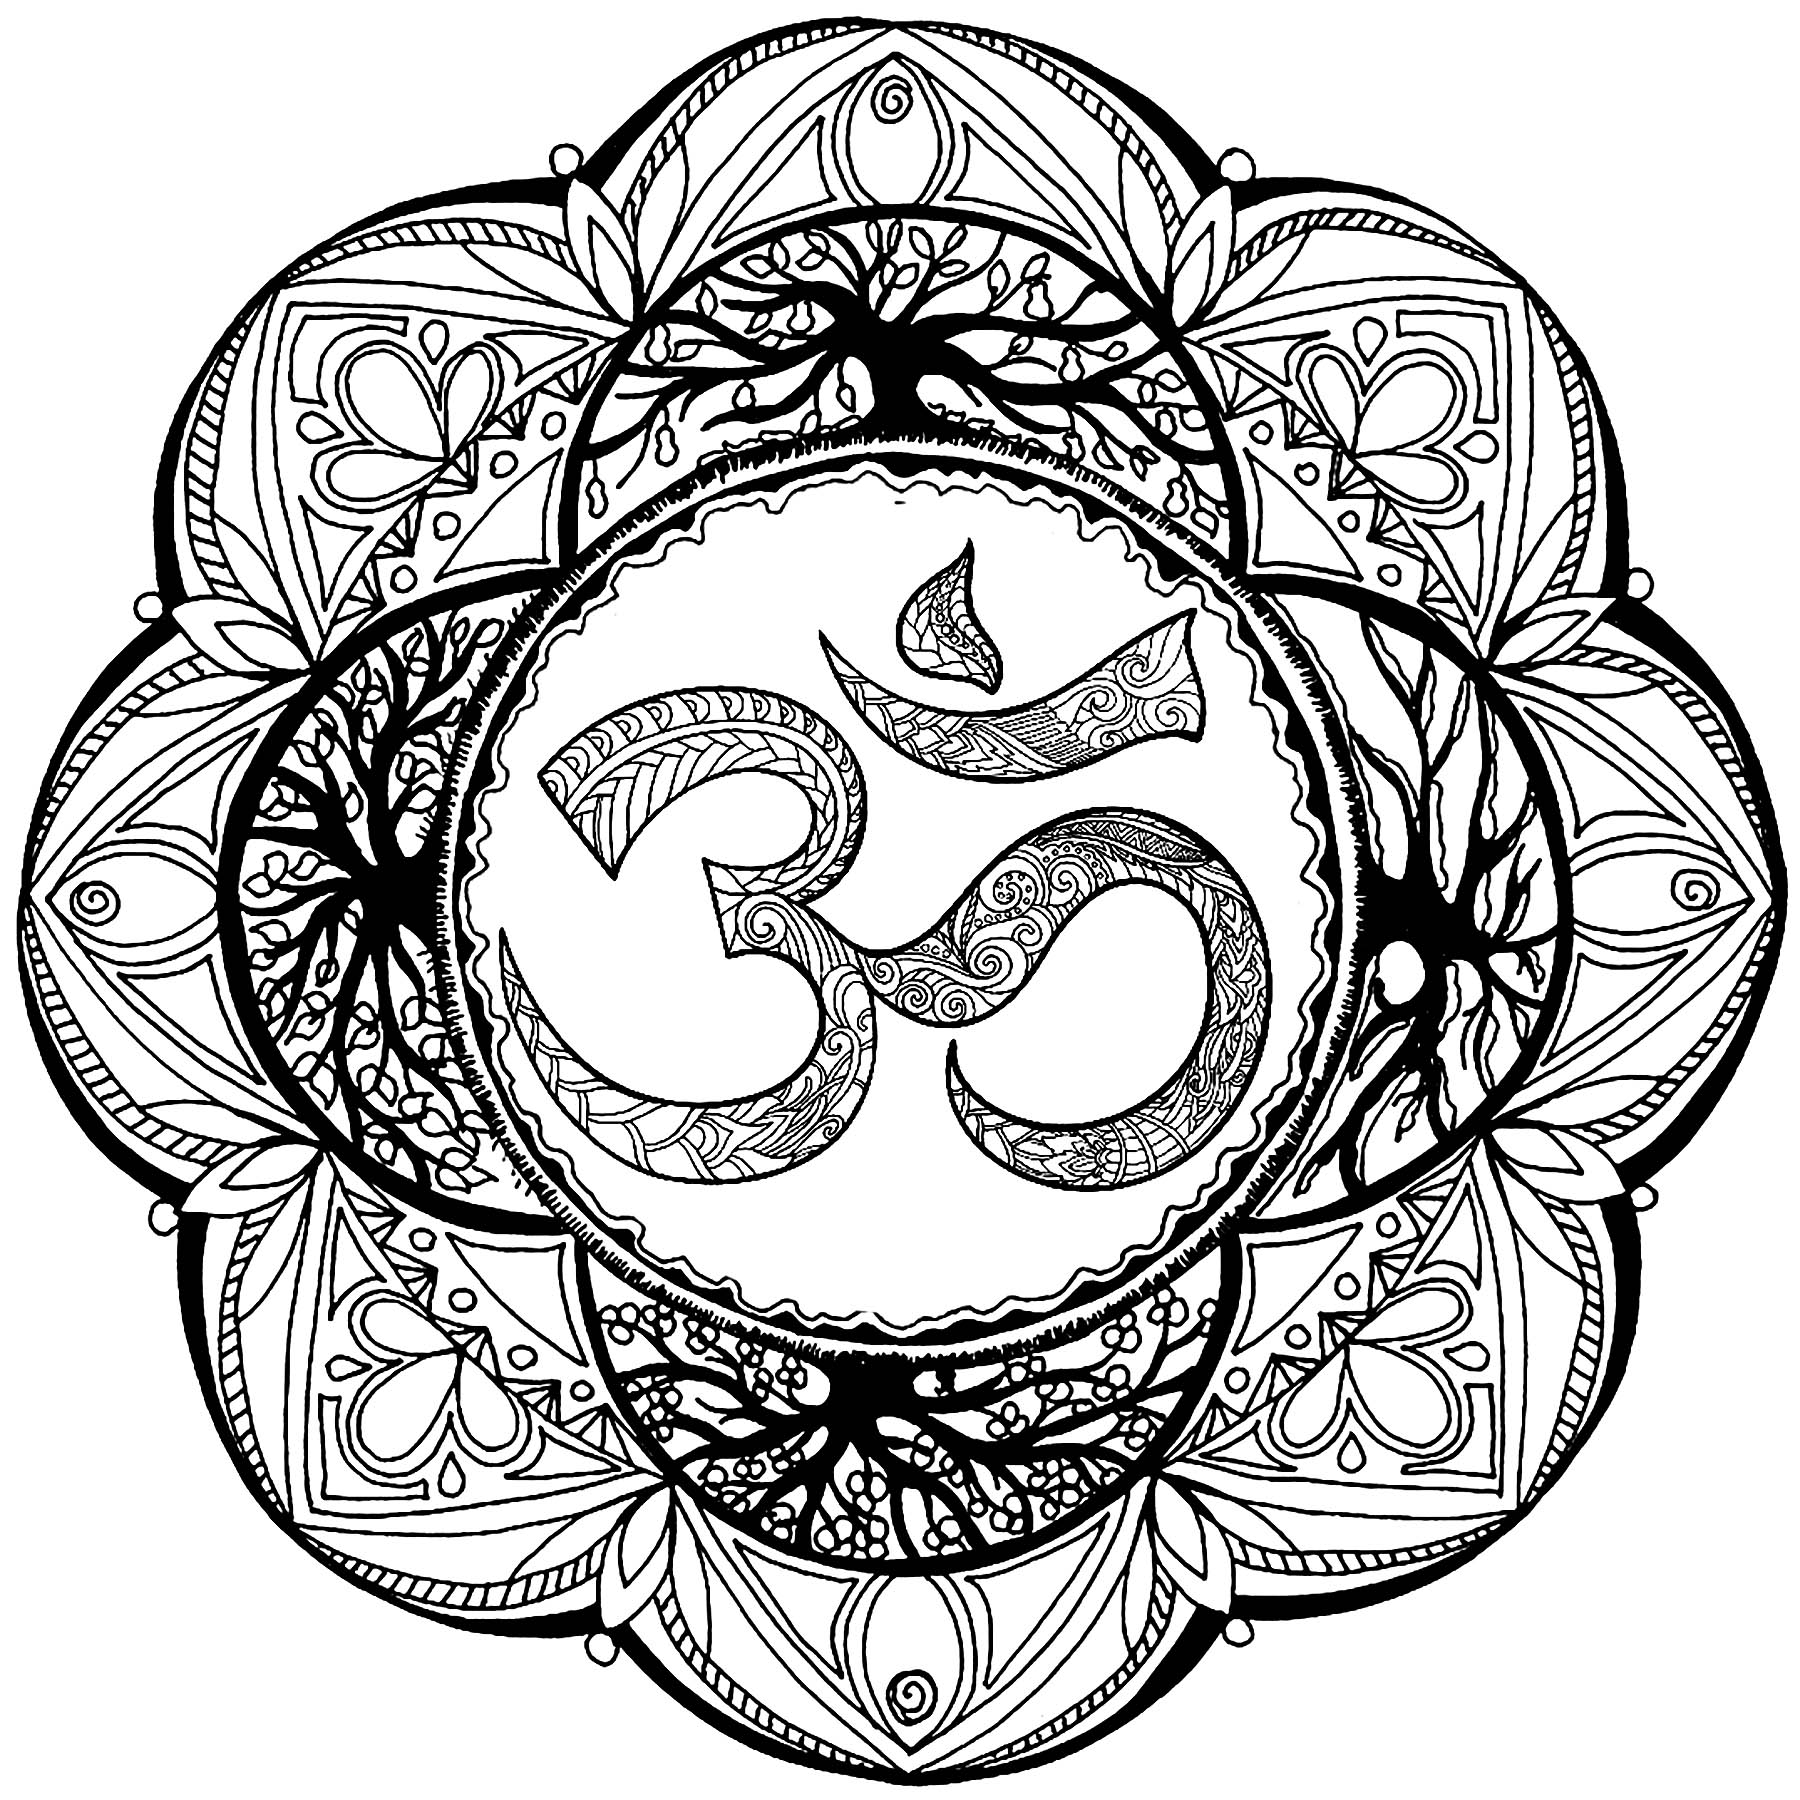 Om, also written as 'Aum', is the most sacred syllable, symbol, or mantra in Hinduism.  This symbol signifies the essence of the ultimate reality, consciousness or Atman.